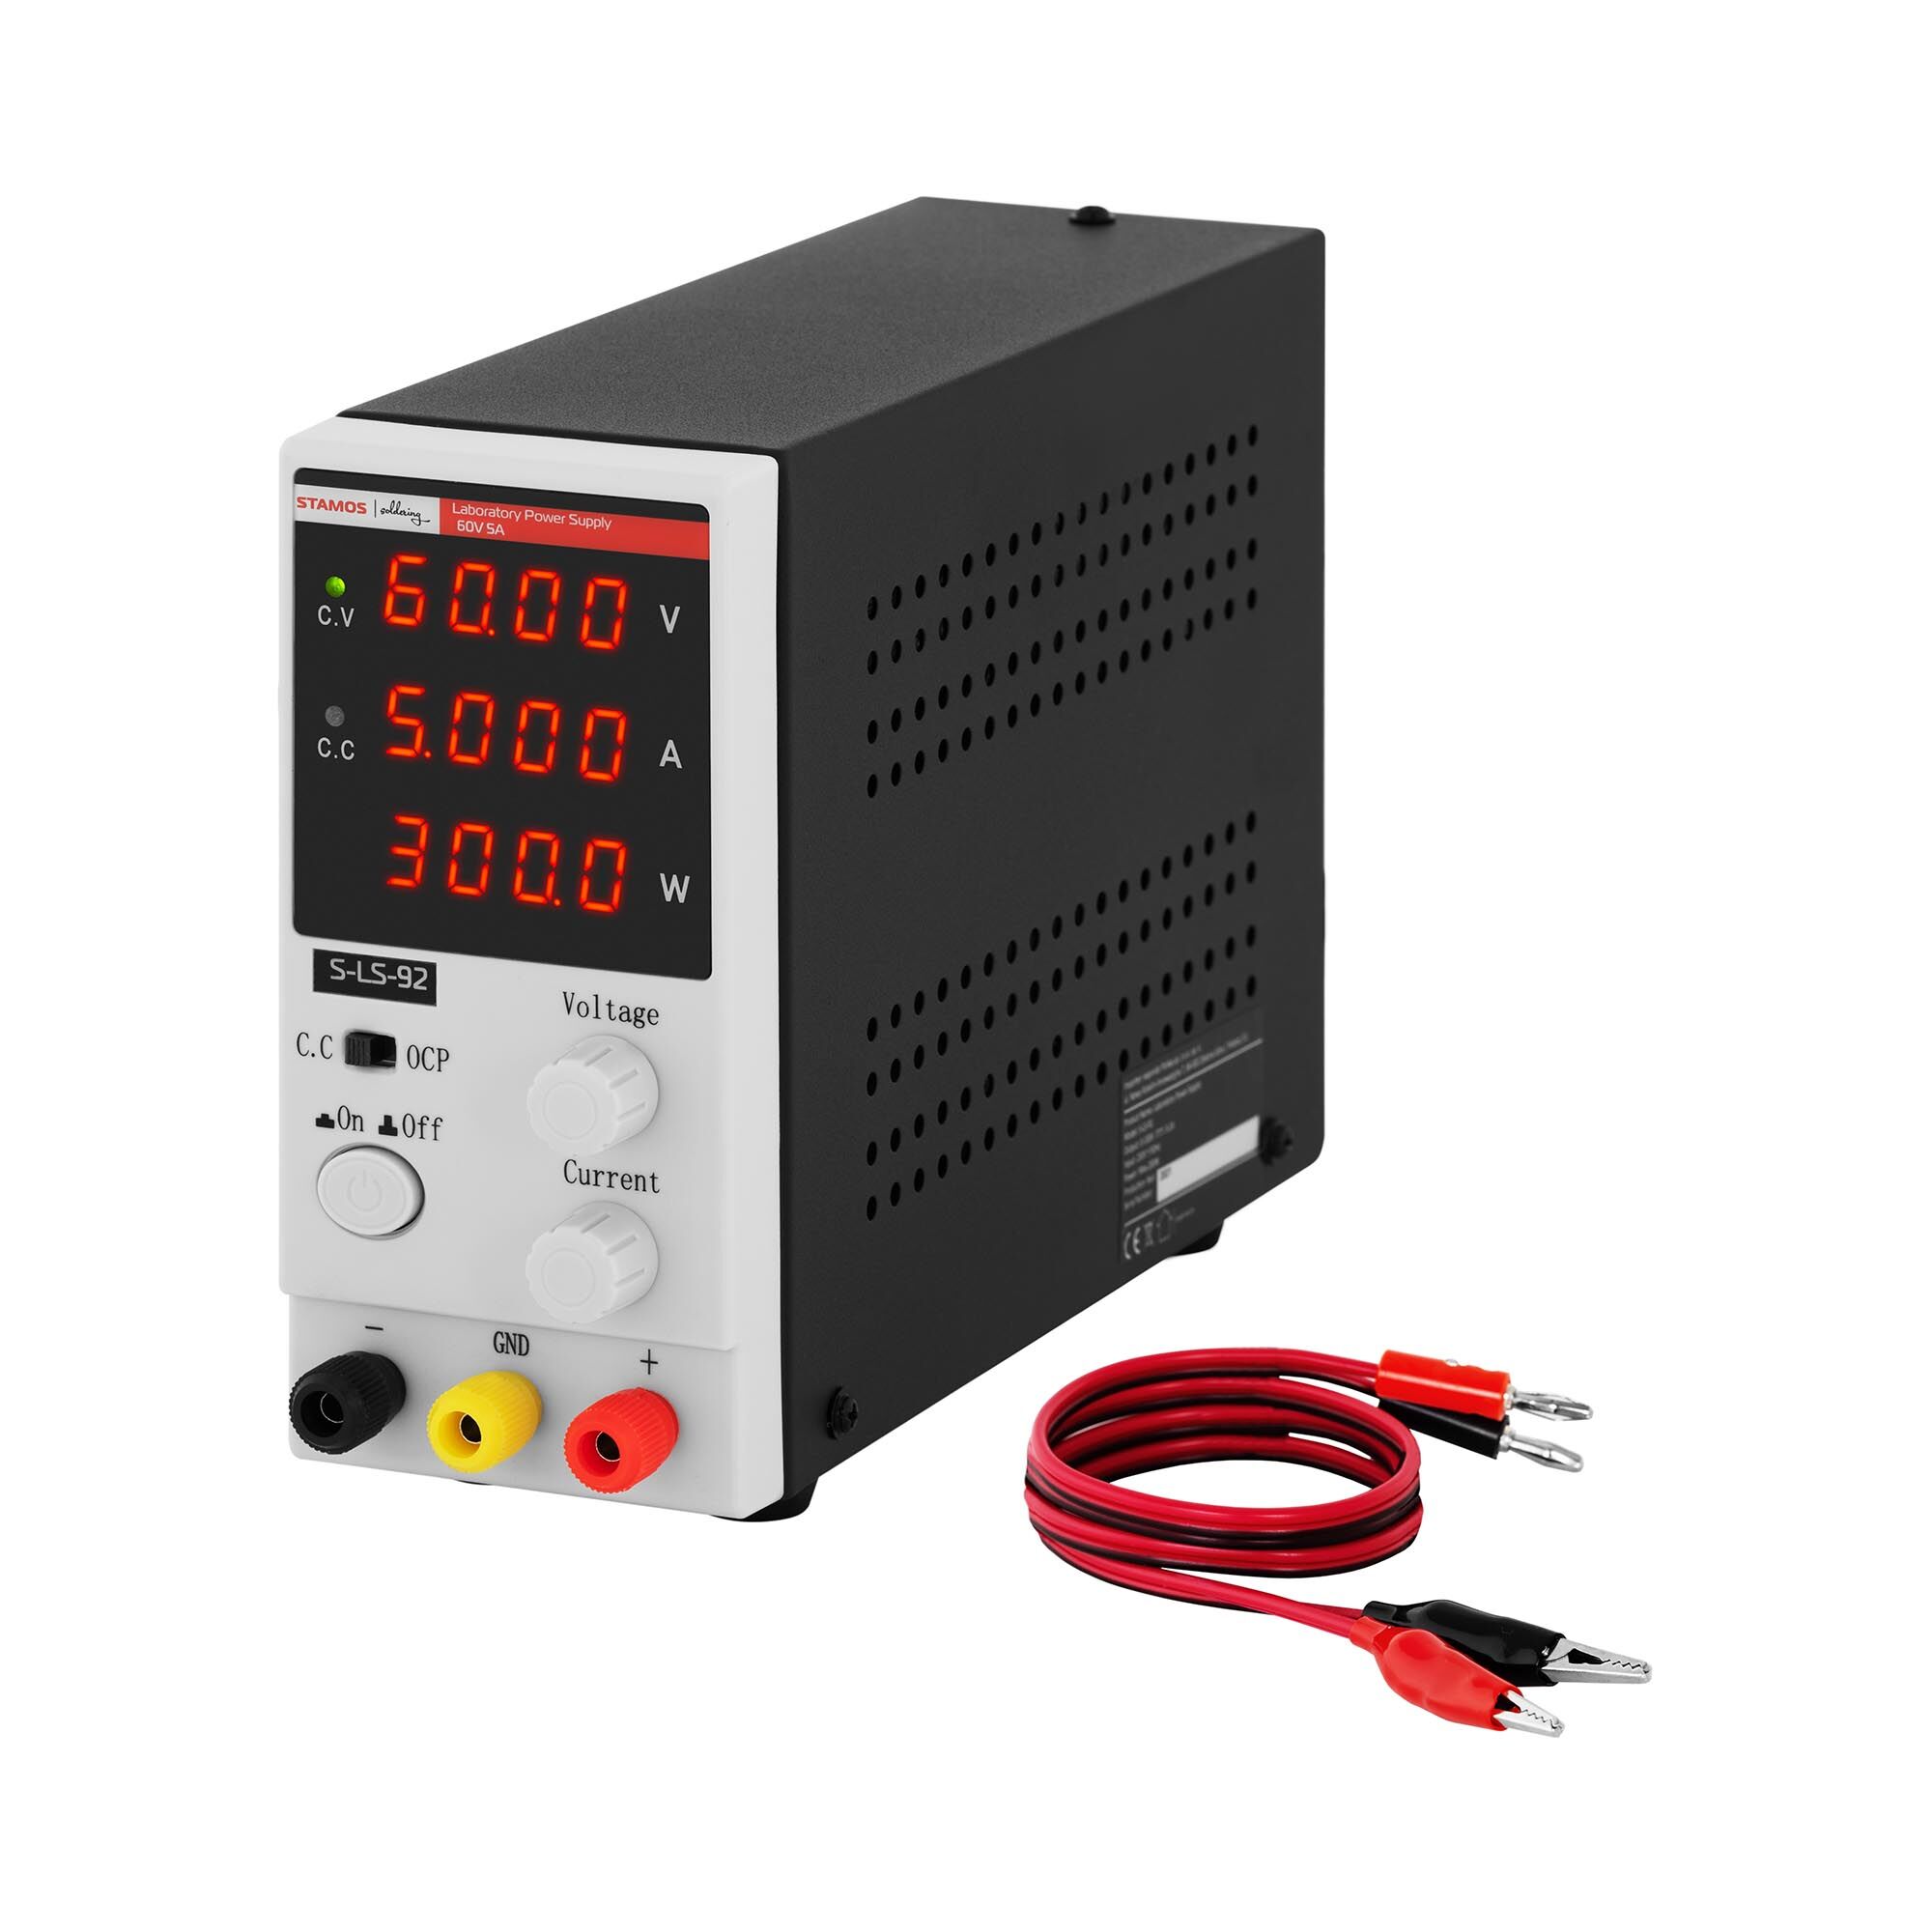 Stamos Soldering Bench Power Supply - 0 - 60 V - 0 - 5 A DC - 300 W - 4-digit LED display